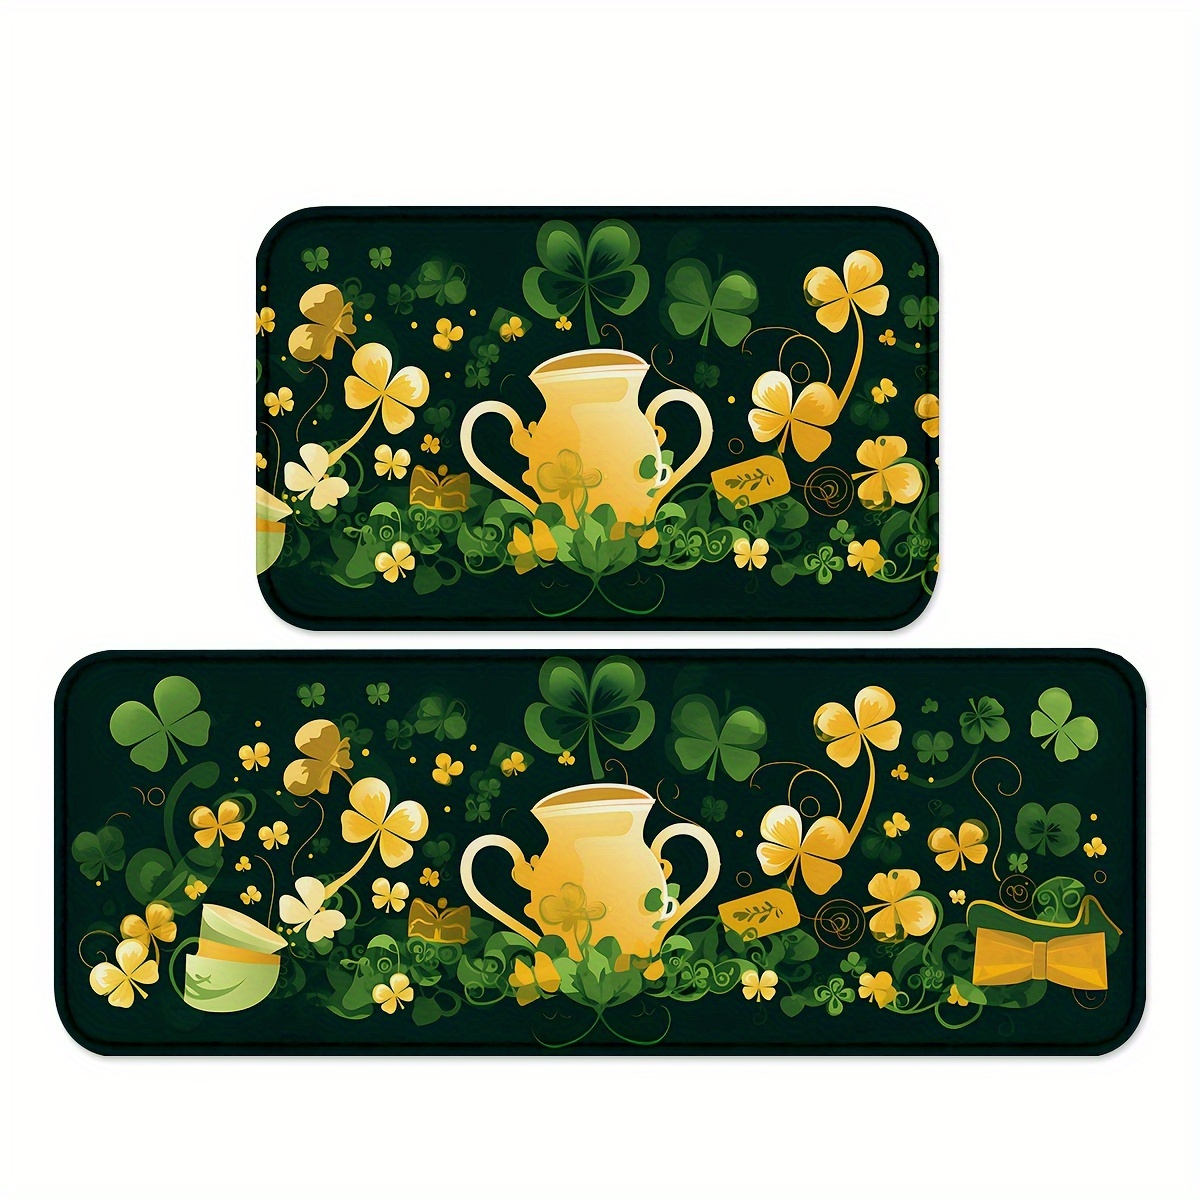 

1/2pcs Golden Kitchen Mats, Anti-skid Patio Pads, Comfortable Throw Cushions, Carpets For Home Office Sink Spring Decor High Traffic Area St. Patrick's Day Indoors Outdoors Hotel Restaurant